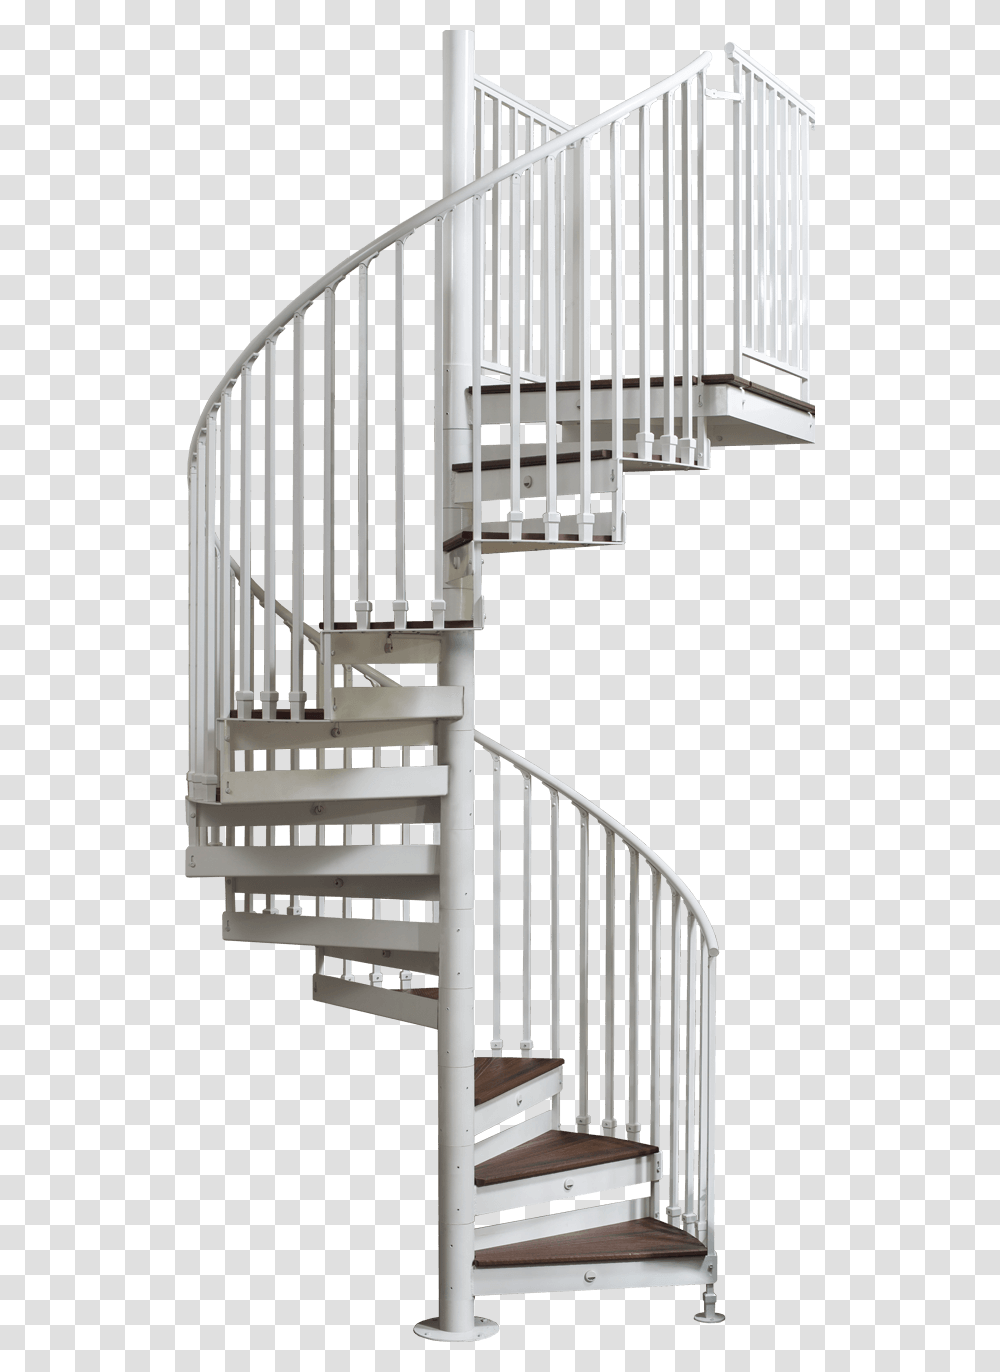 Outdoor Round Stairs, Staircase, Handrail, Banister, Railing Transparent Png